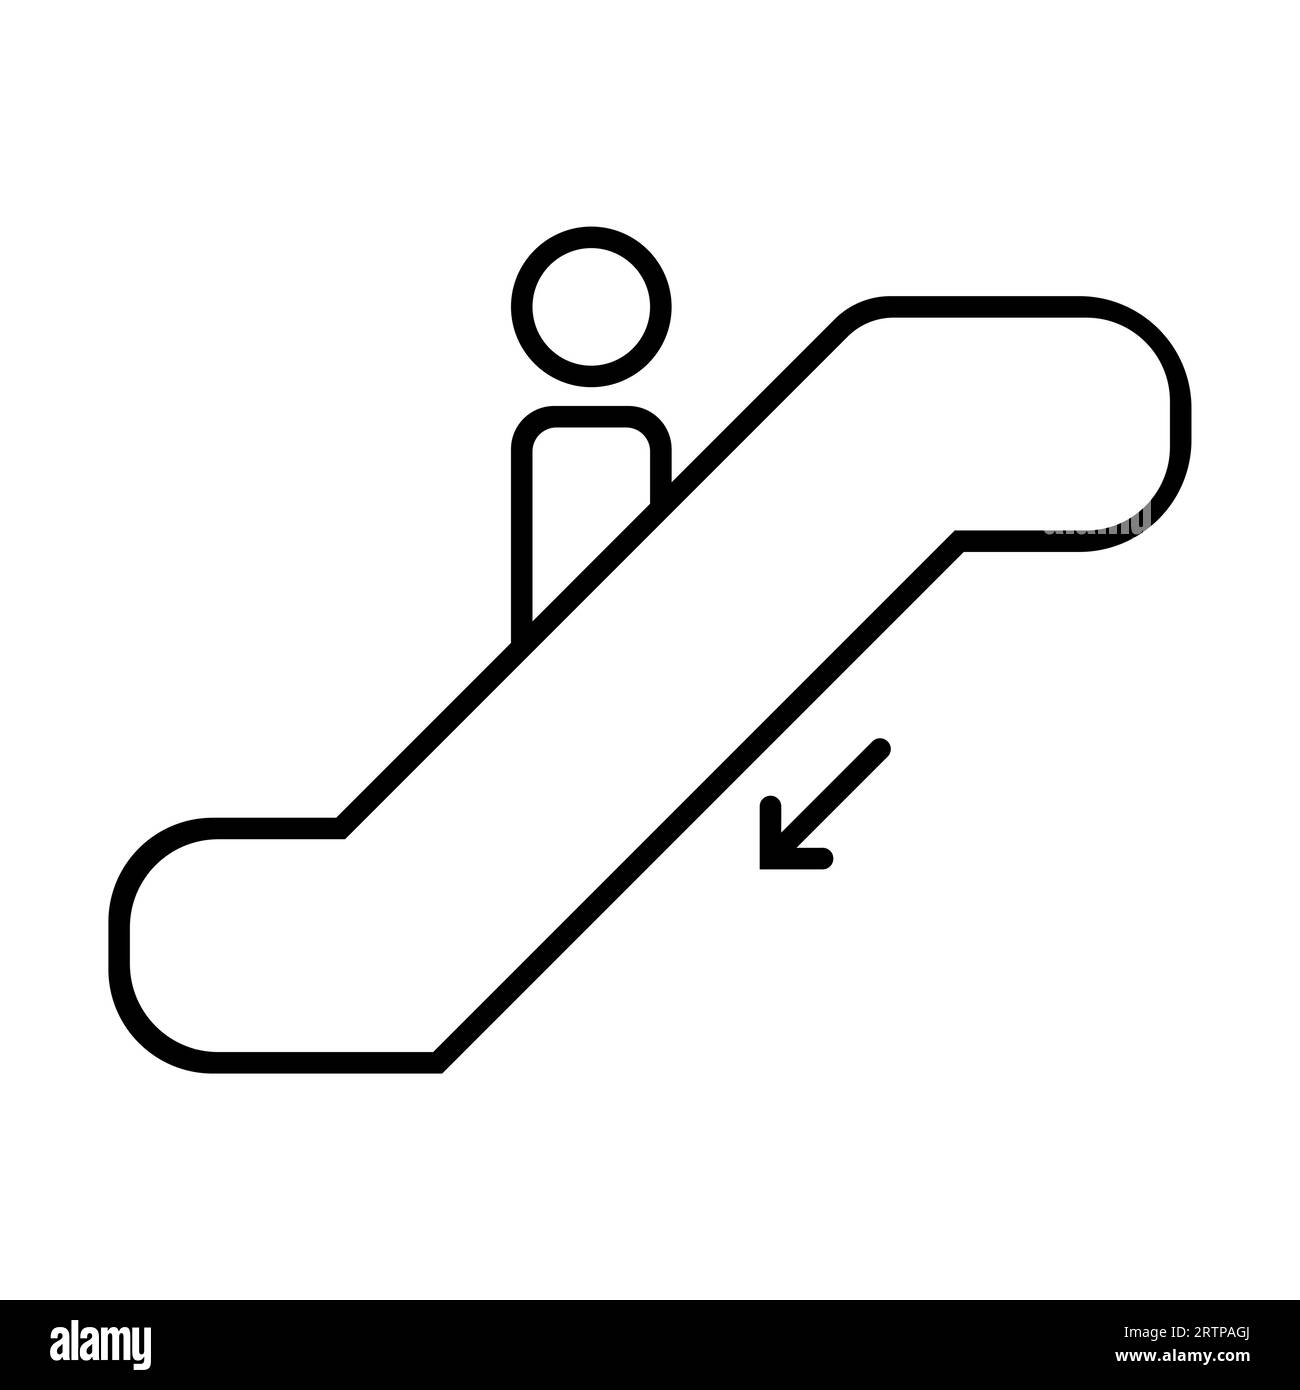 Simple outline of person on escalator going down vector icon Stock Vector